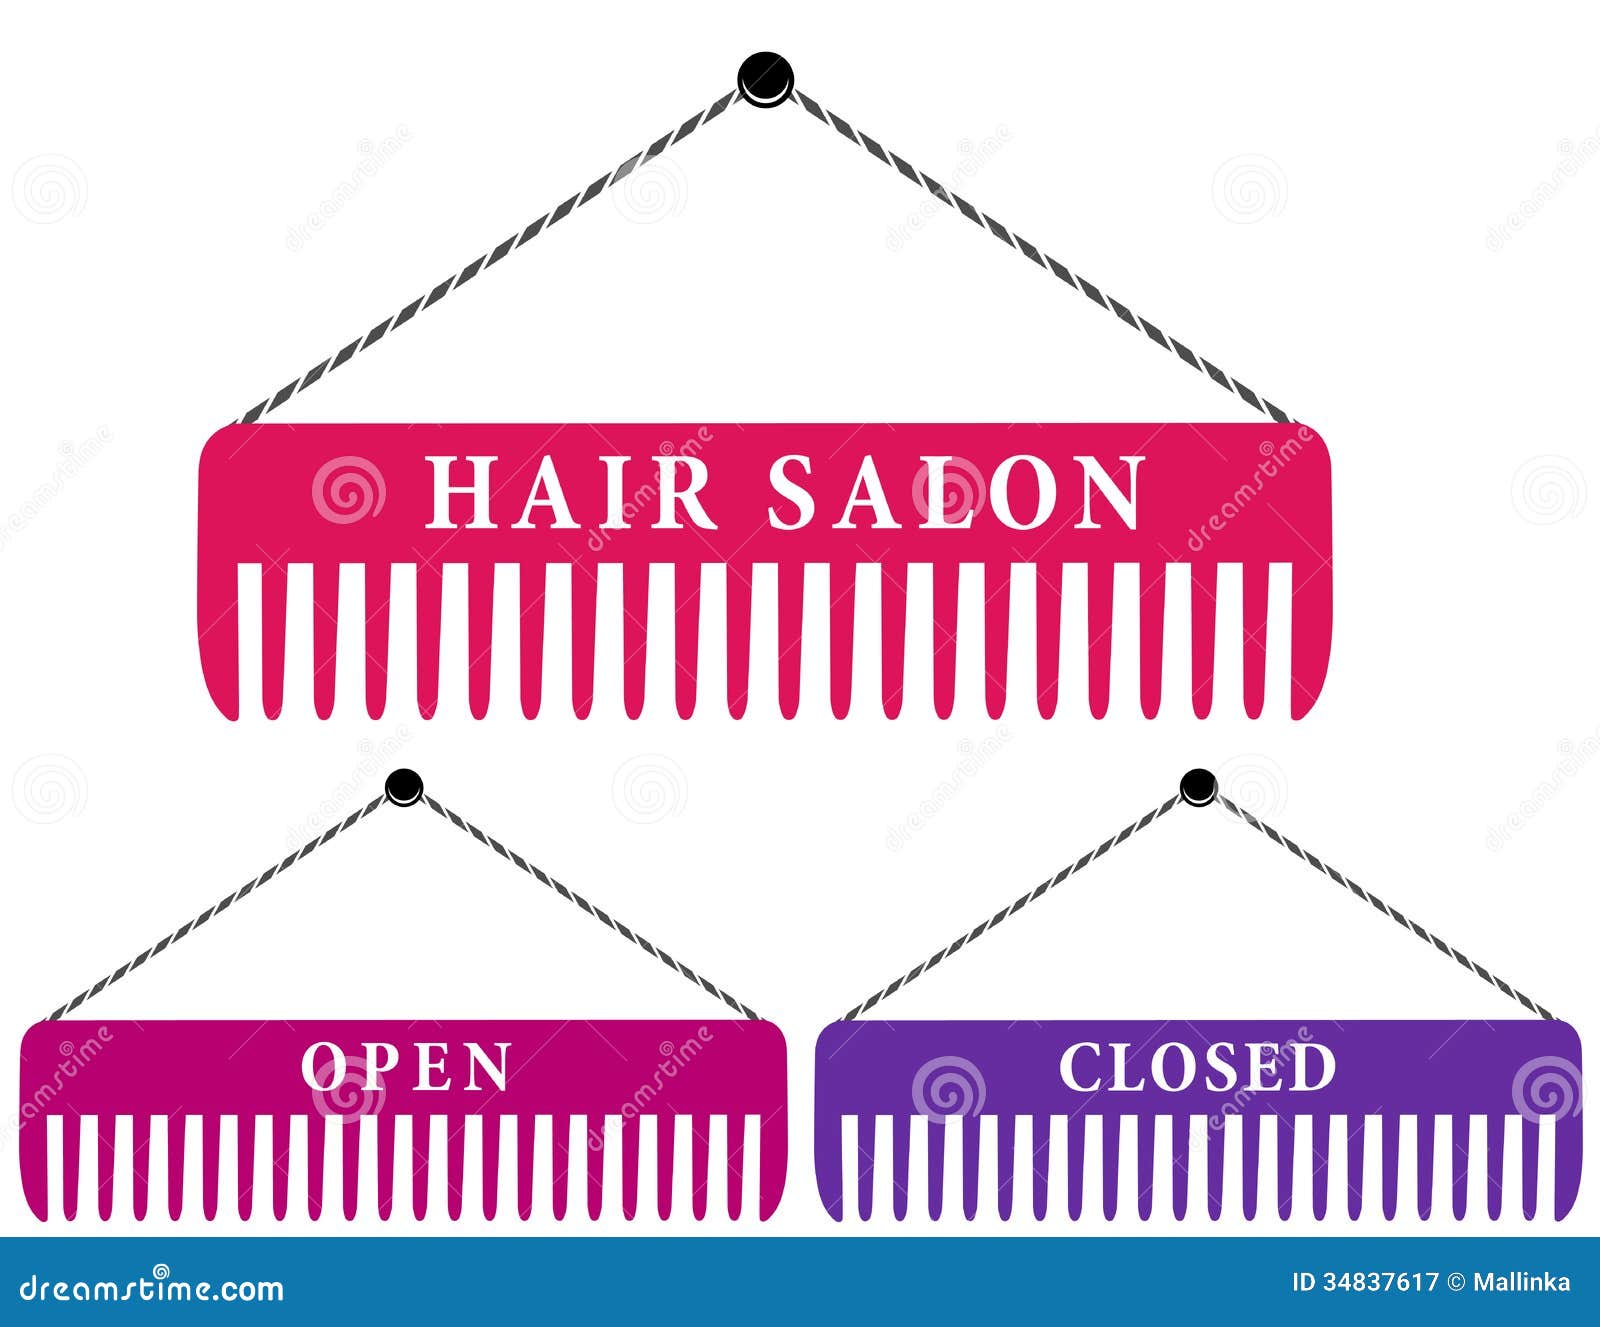 Hair Salon Sign With Comb Royalty Free Stock Photography 